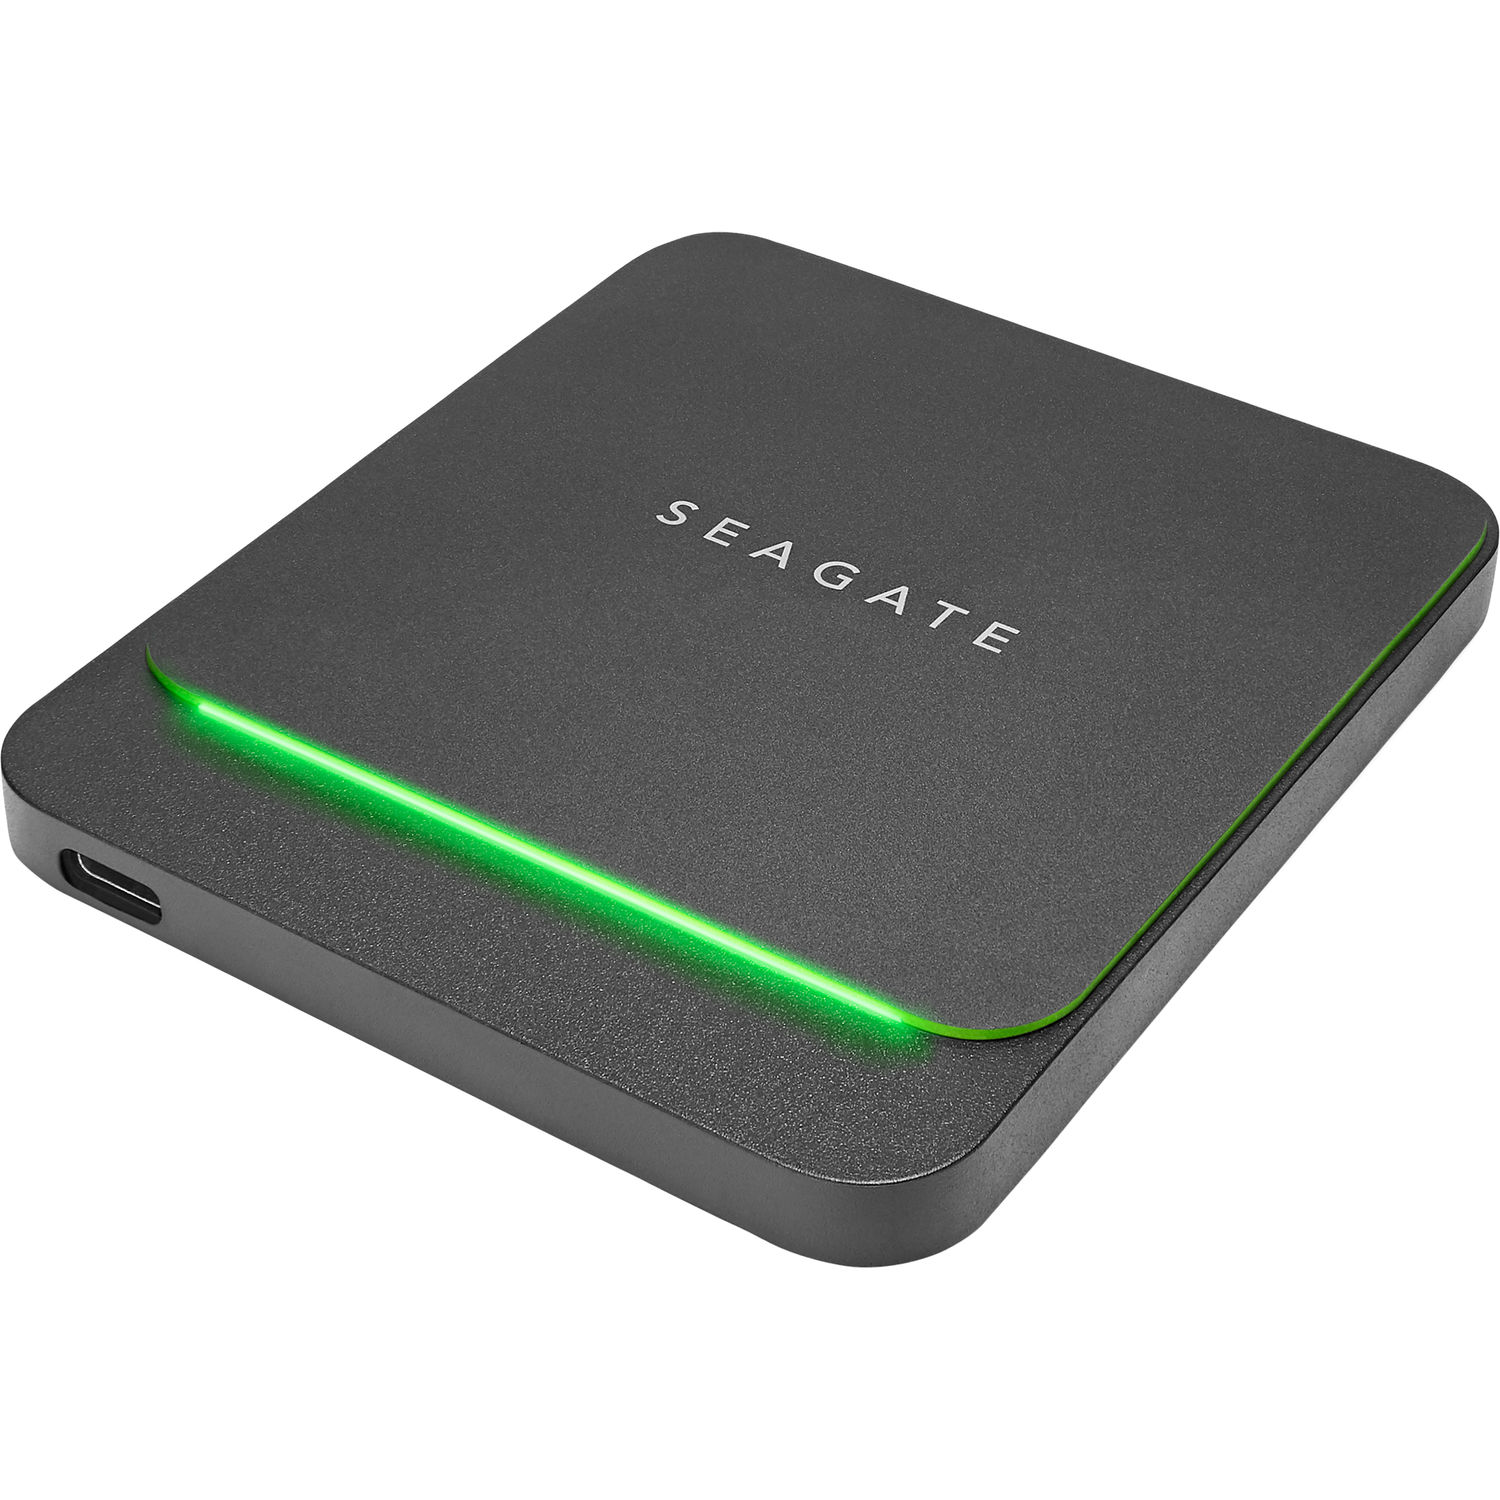 Seagate BarraCuda STJM1000400 1TB Portable Solid State Drive - image 2 of 5